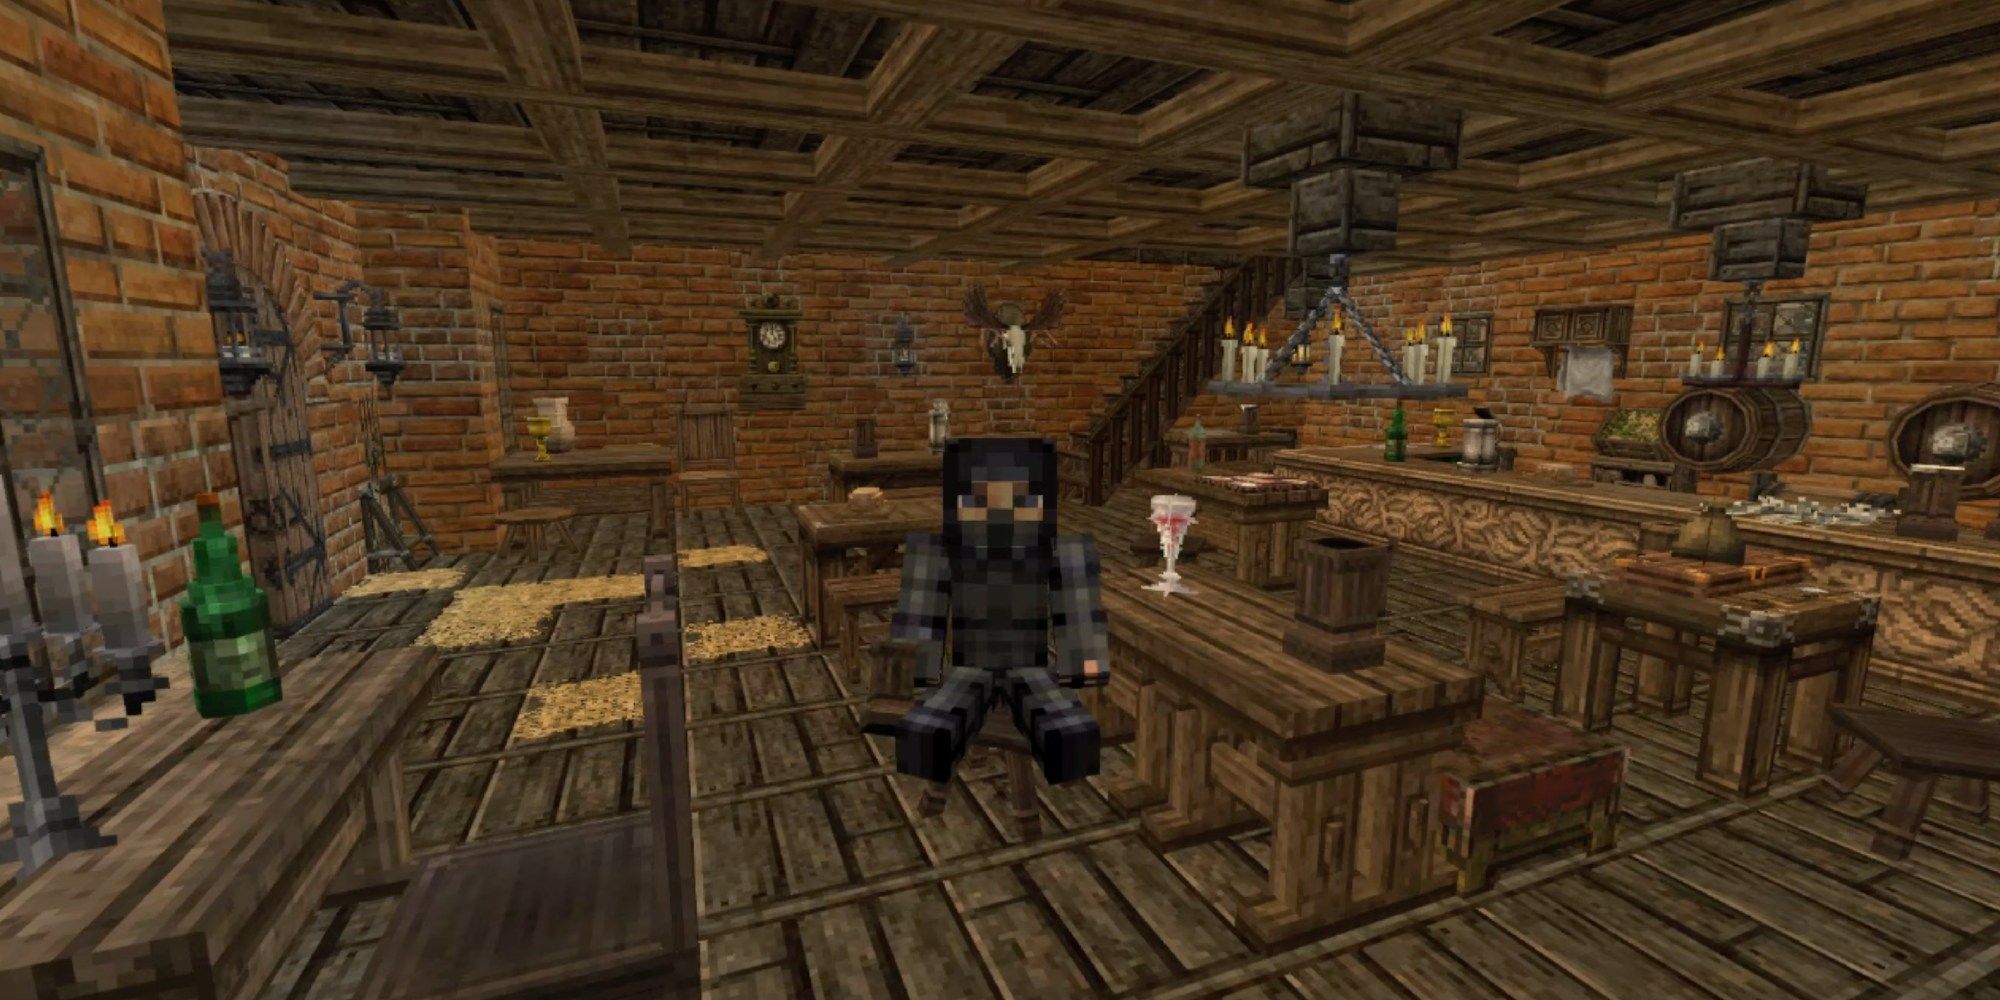 Minecraft Tavern interior designed with the Conquest Reforged resource pack